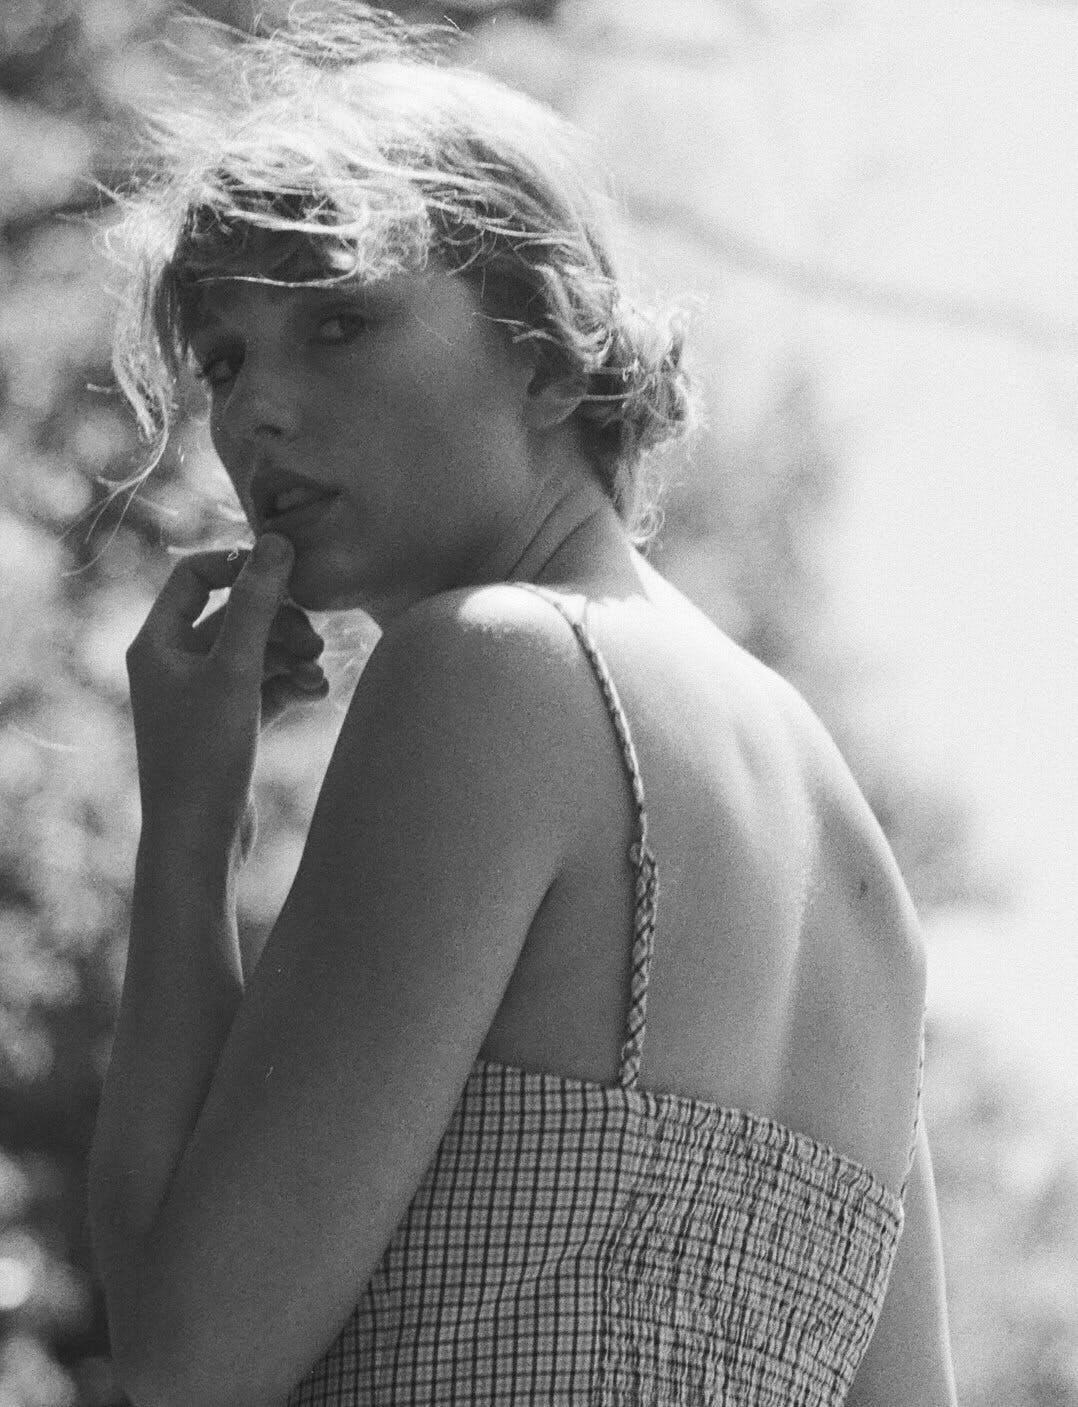 Taylor Swift wearing a gingham sundress for her folklore album